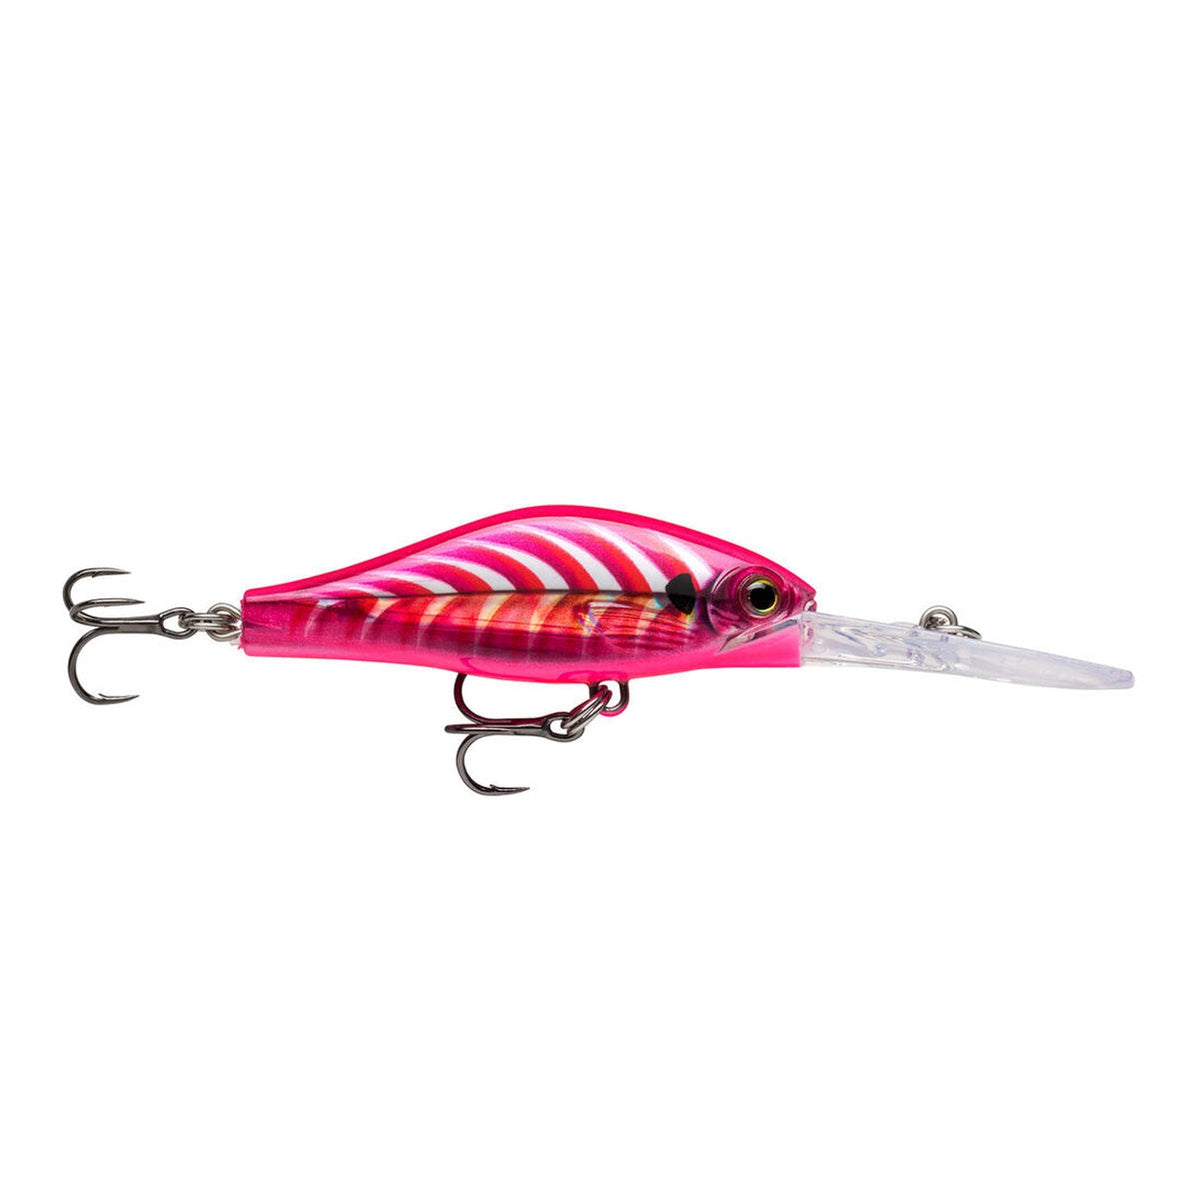 Fishing Lures for Sale - #1 for fishing lures in Australia Page 5 - Addict  Tackle